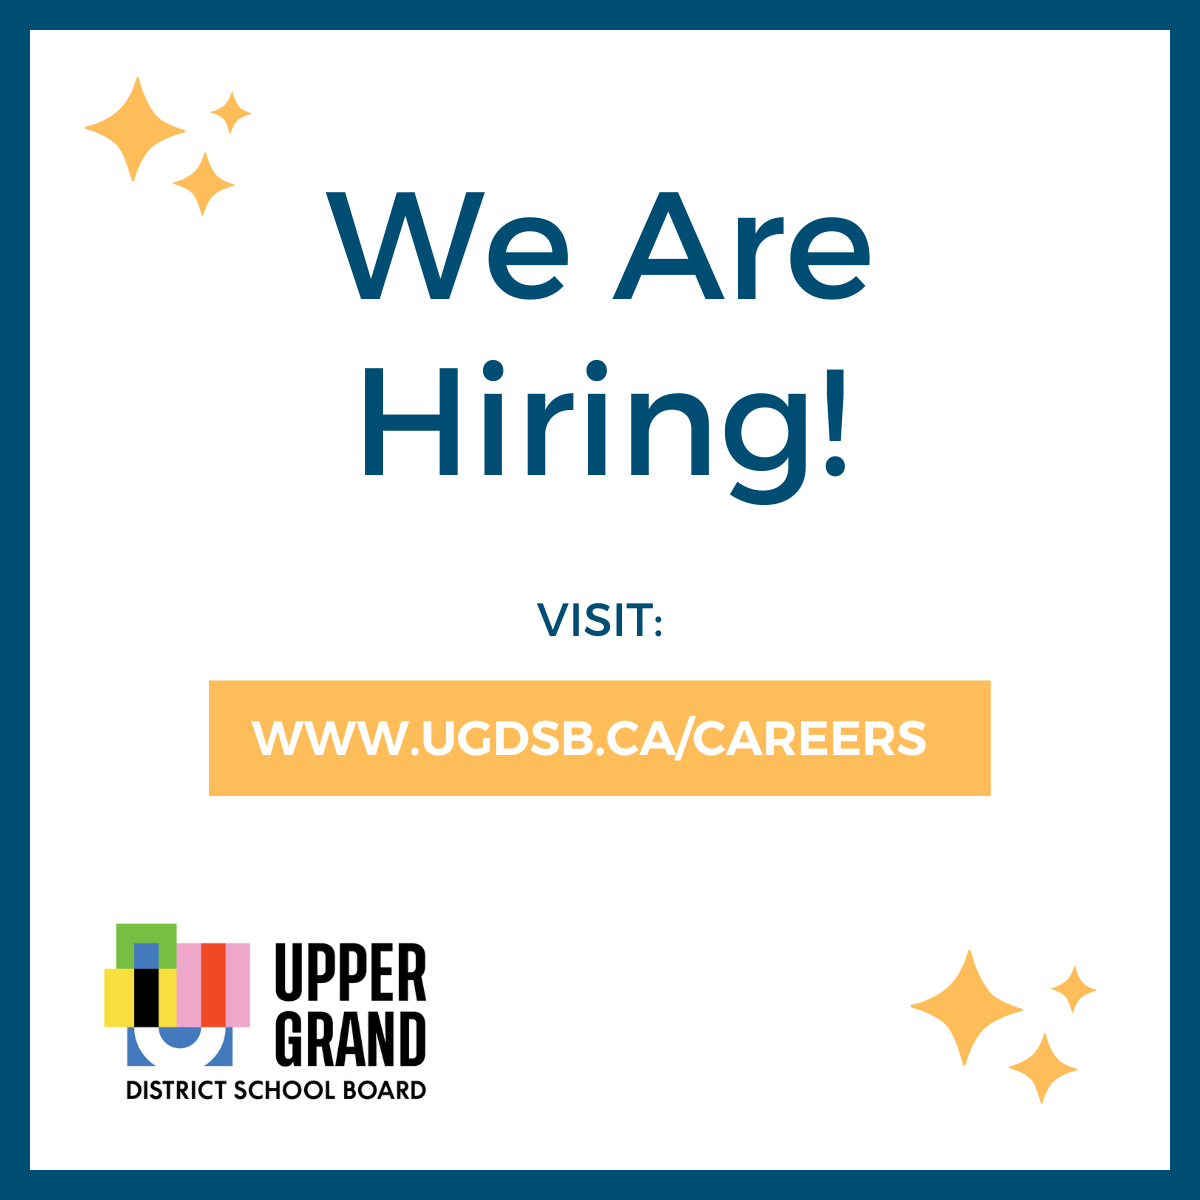 Image with graphics and text that reads "we are hiring. visit www.ugdsb.ca/careers"